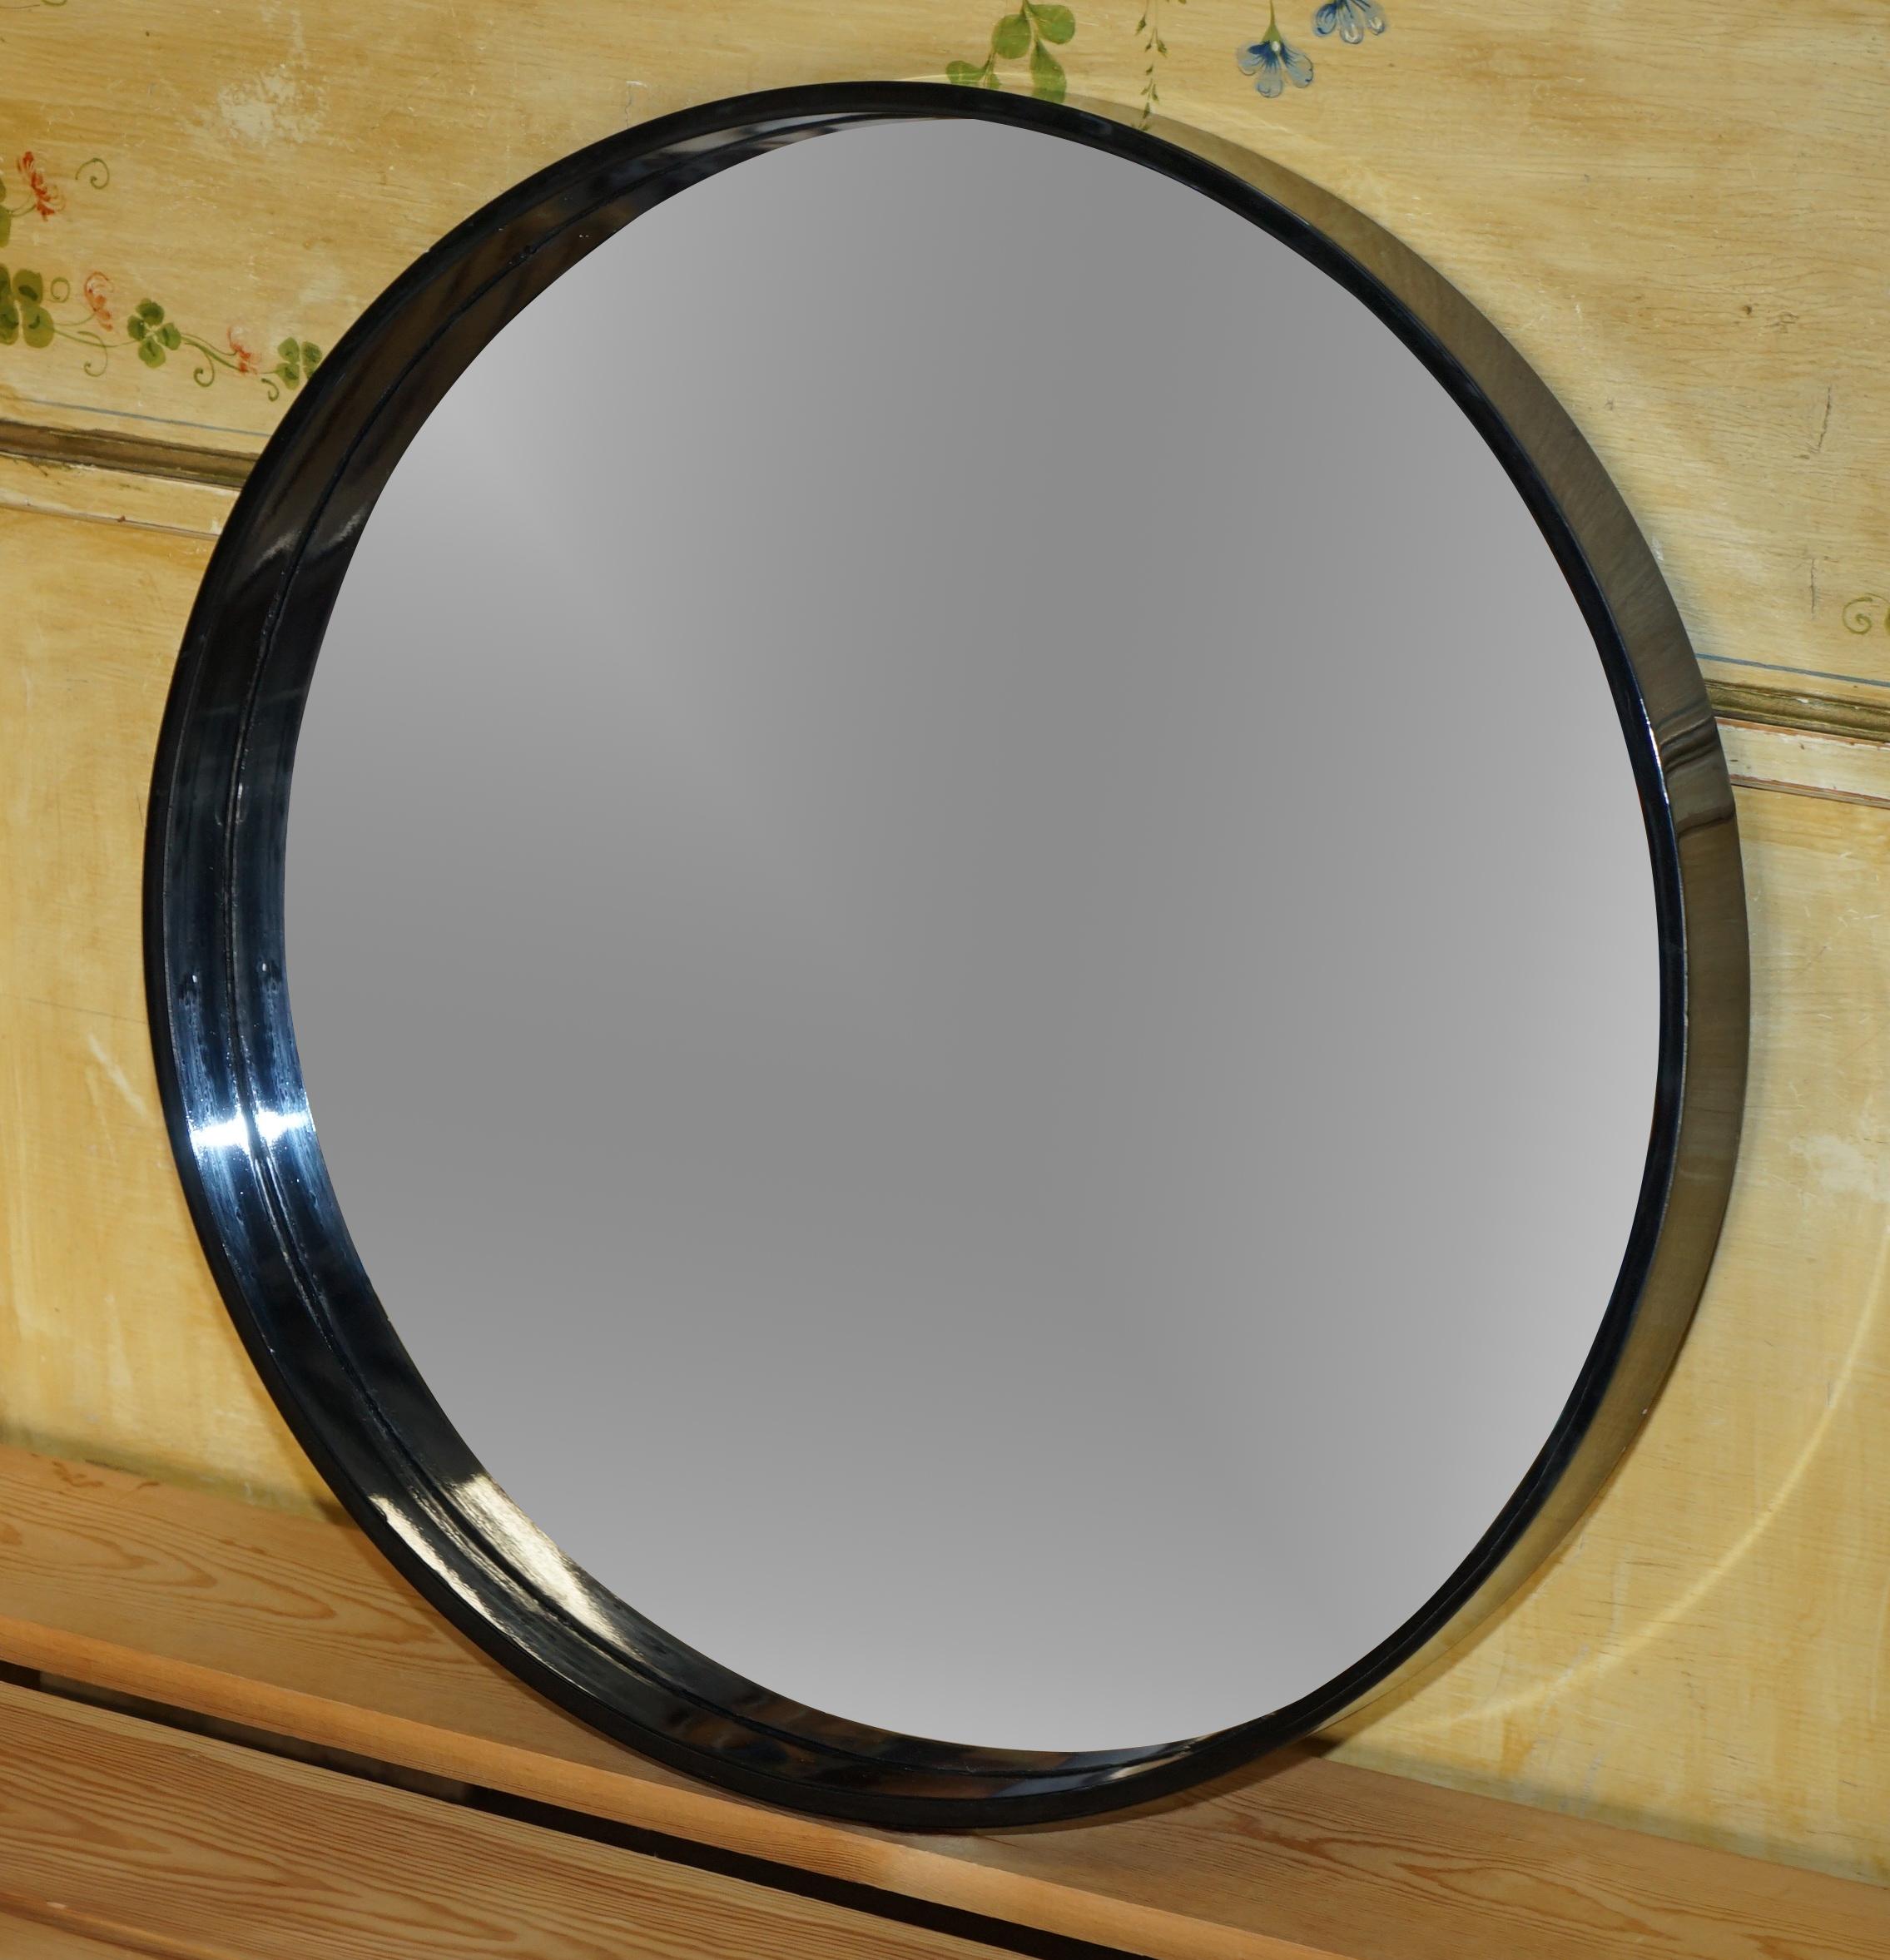 We are delighted to offer for sale 1 of 7 round wall mirrors with deep ebonised frames

This sale is for 1 mirror with the option to buy up to 8 in total

They are good looking and decorative pieces, the frames may have some light patina marks but